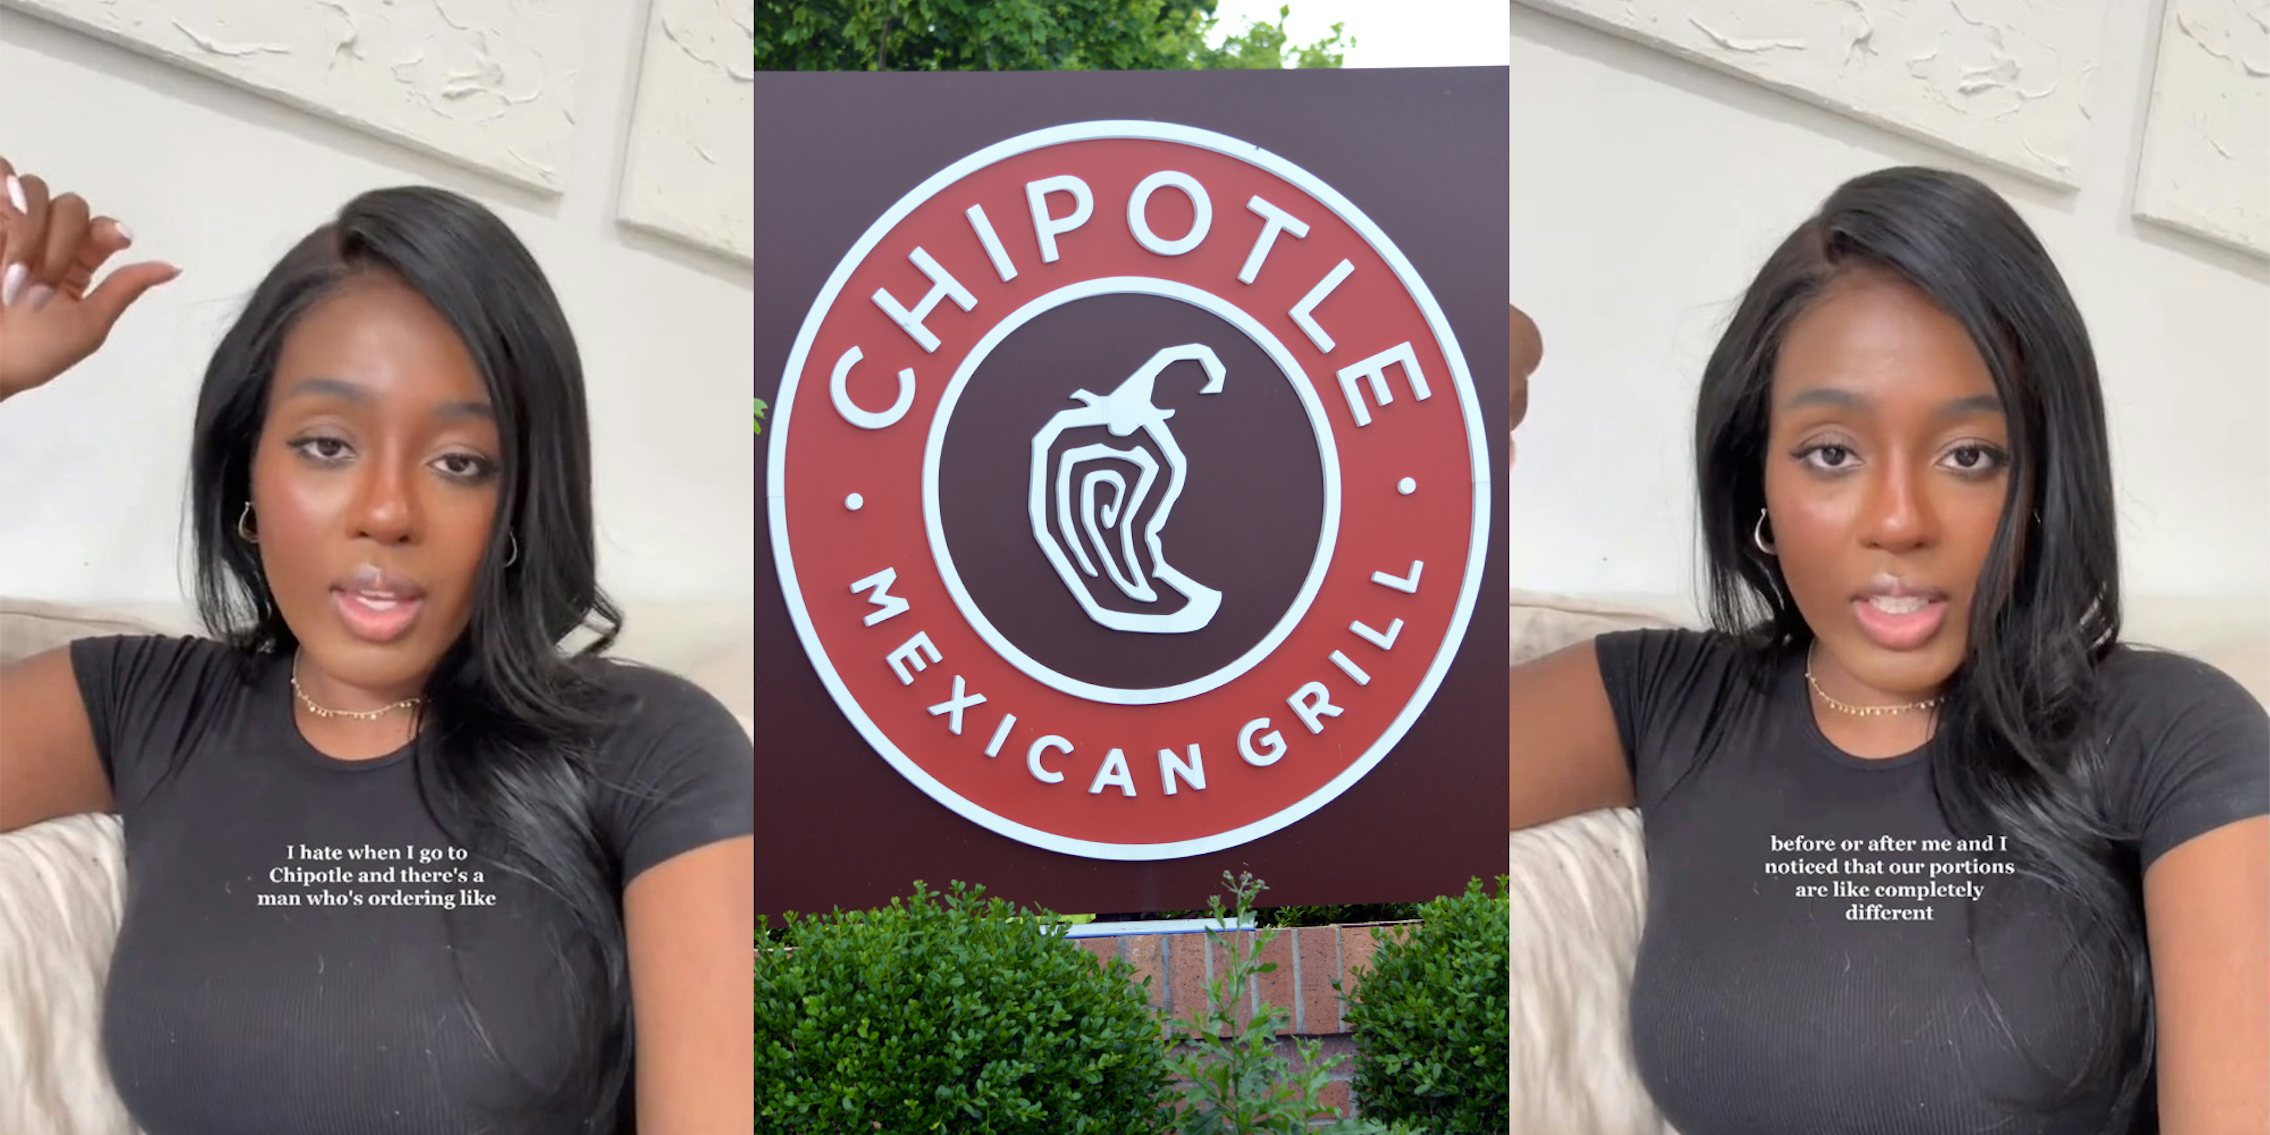 Woman calls out getting less food than male customers at Chipotle